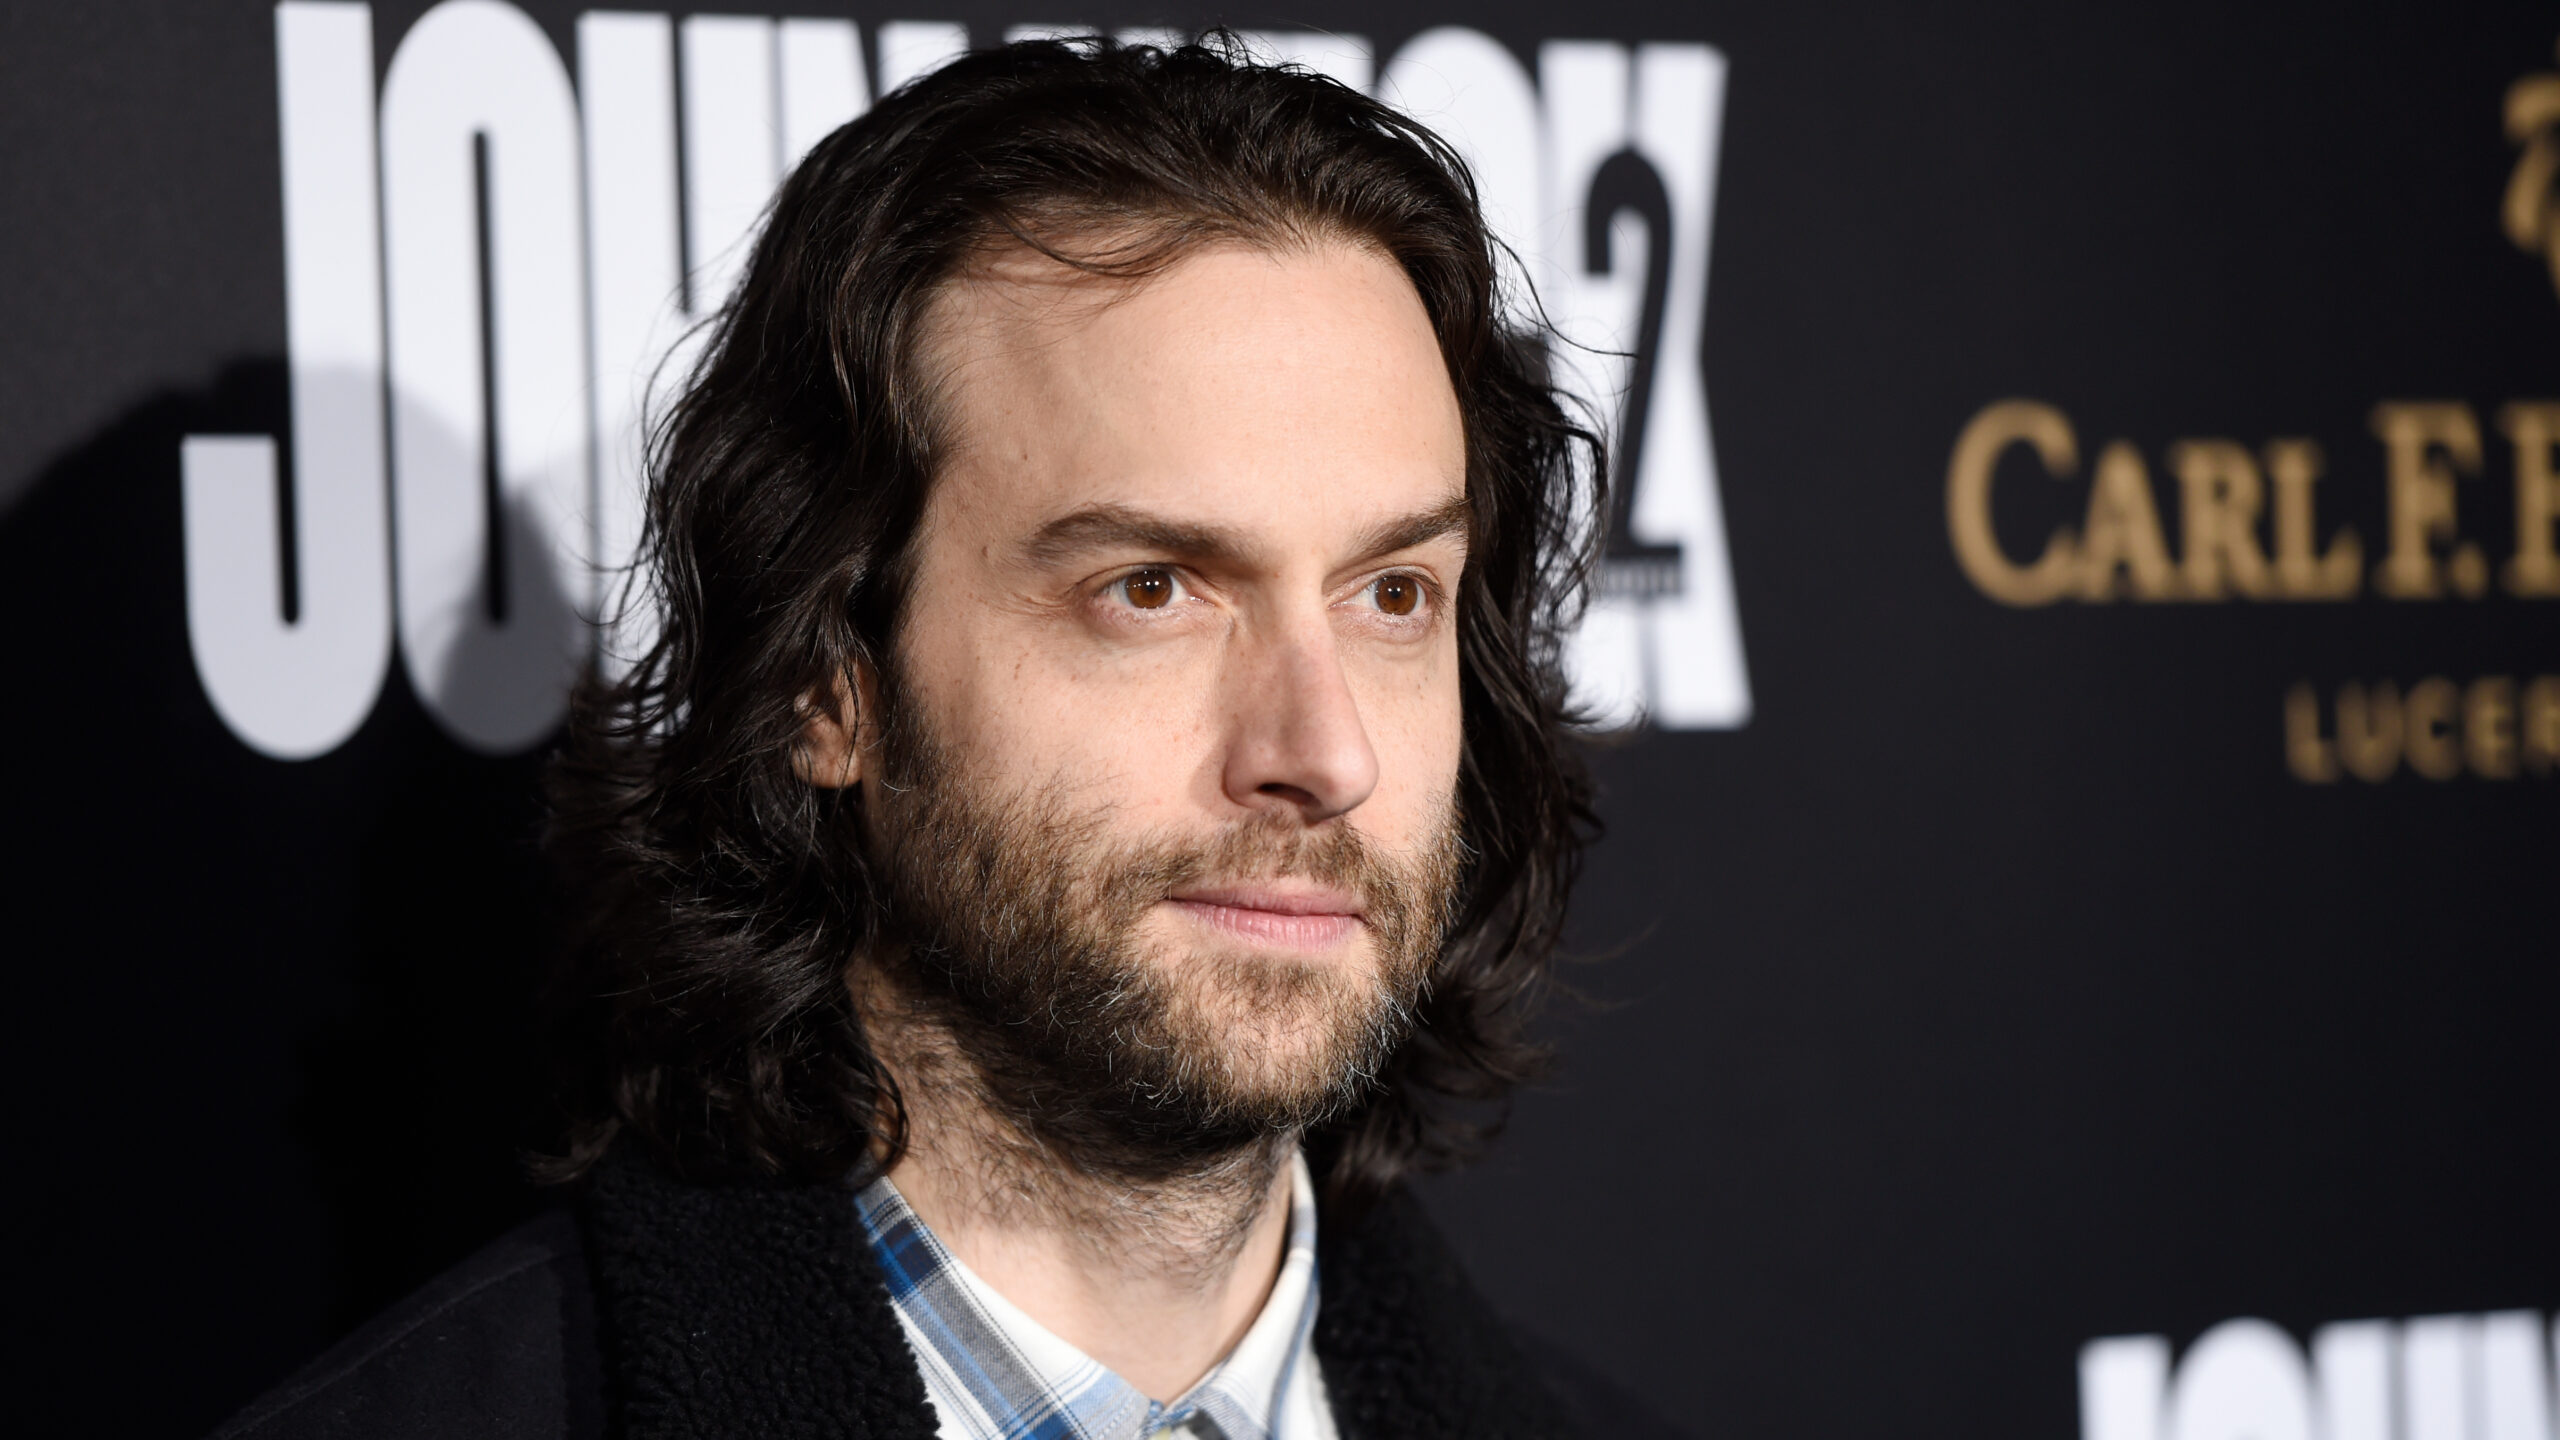 Chris D’Elia faces a child-porn lawsuit from a woman who says he had sex with her at 17